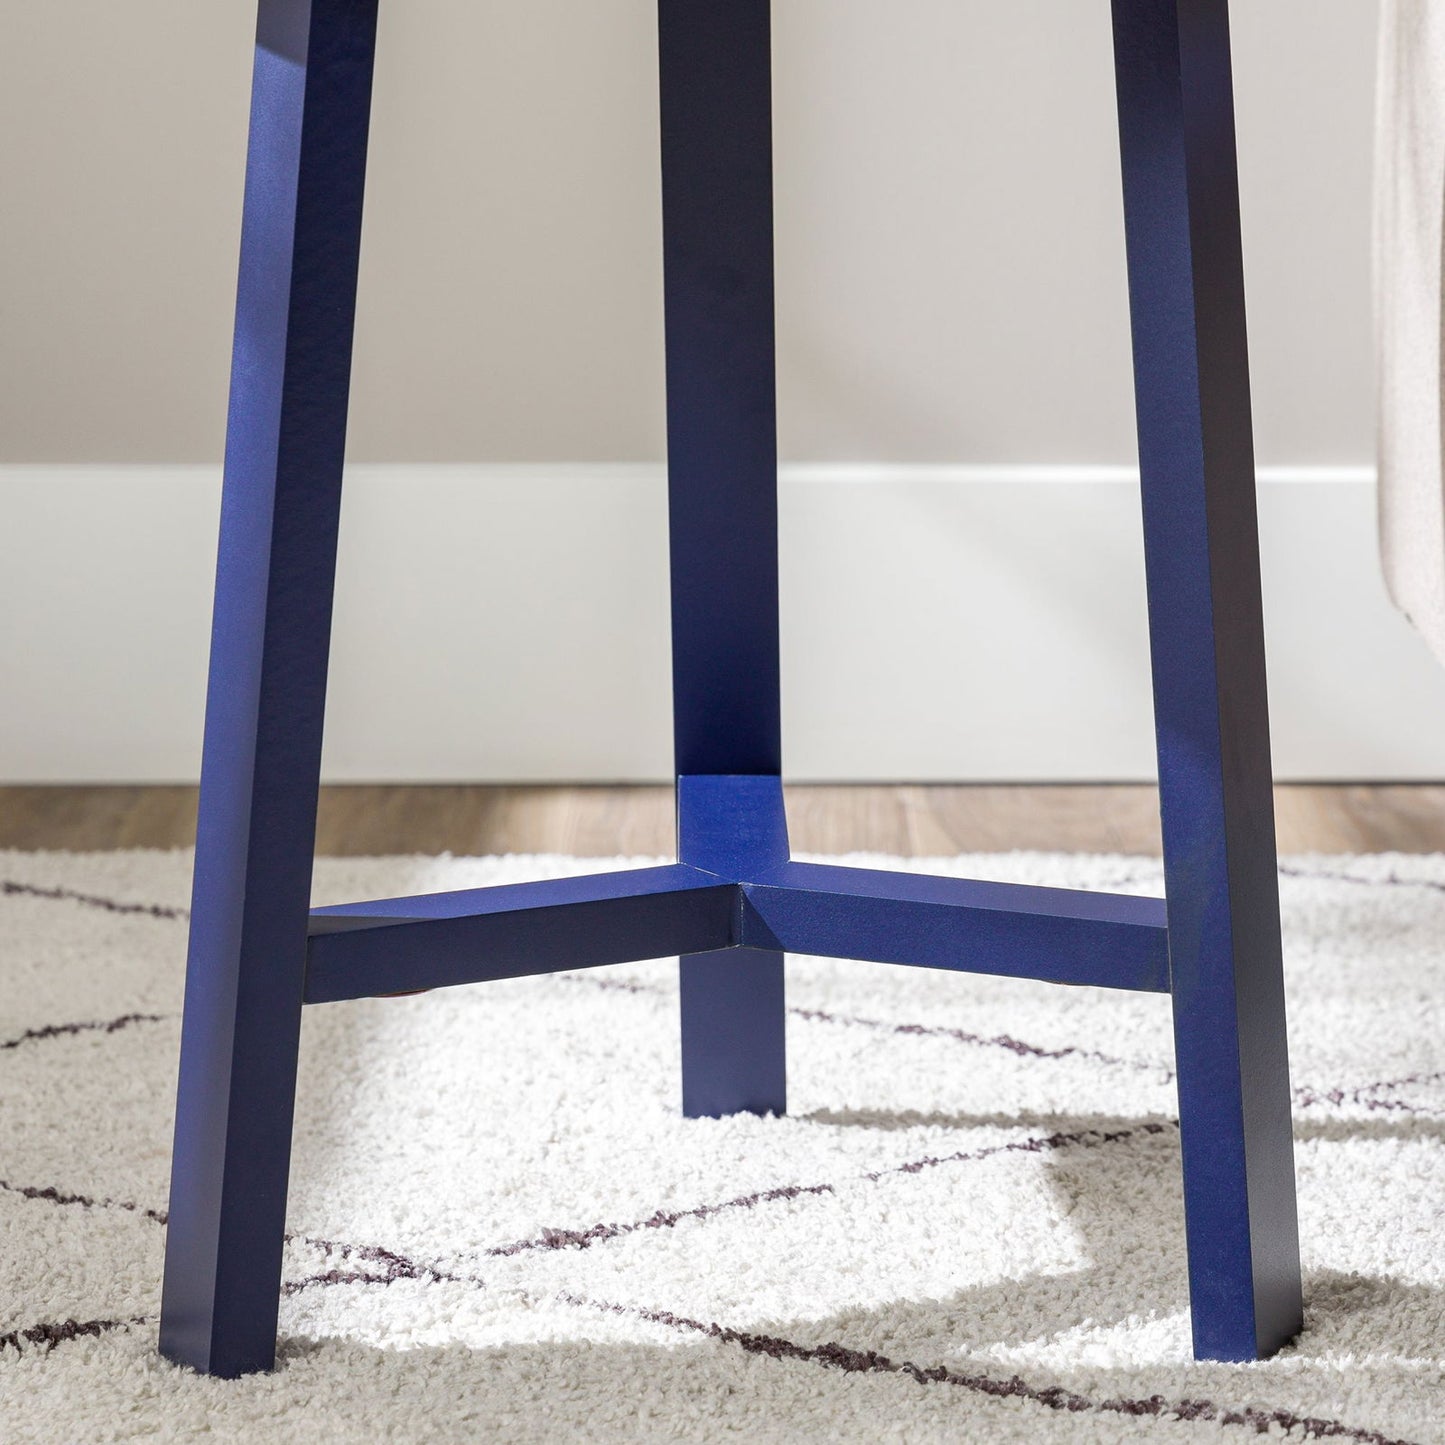 Emerson Simple 3-Leg Round Side Table - Mac & Mabel